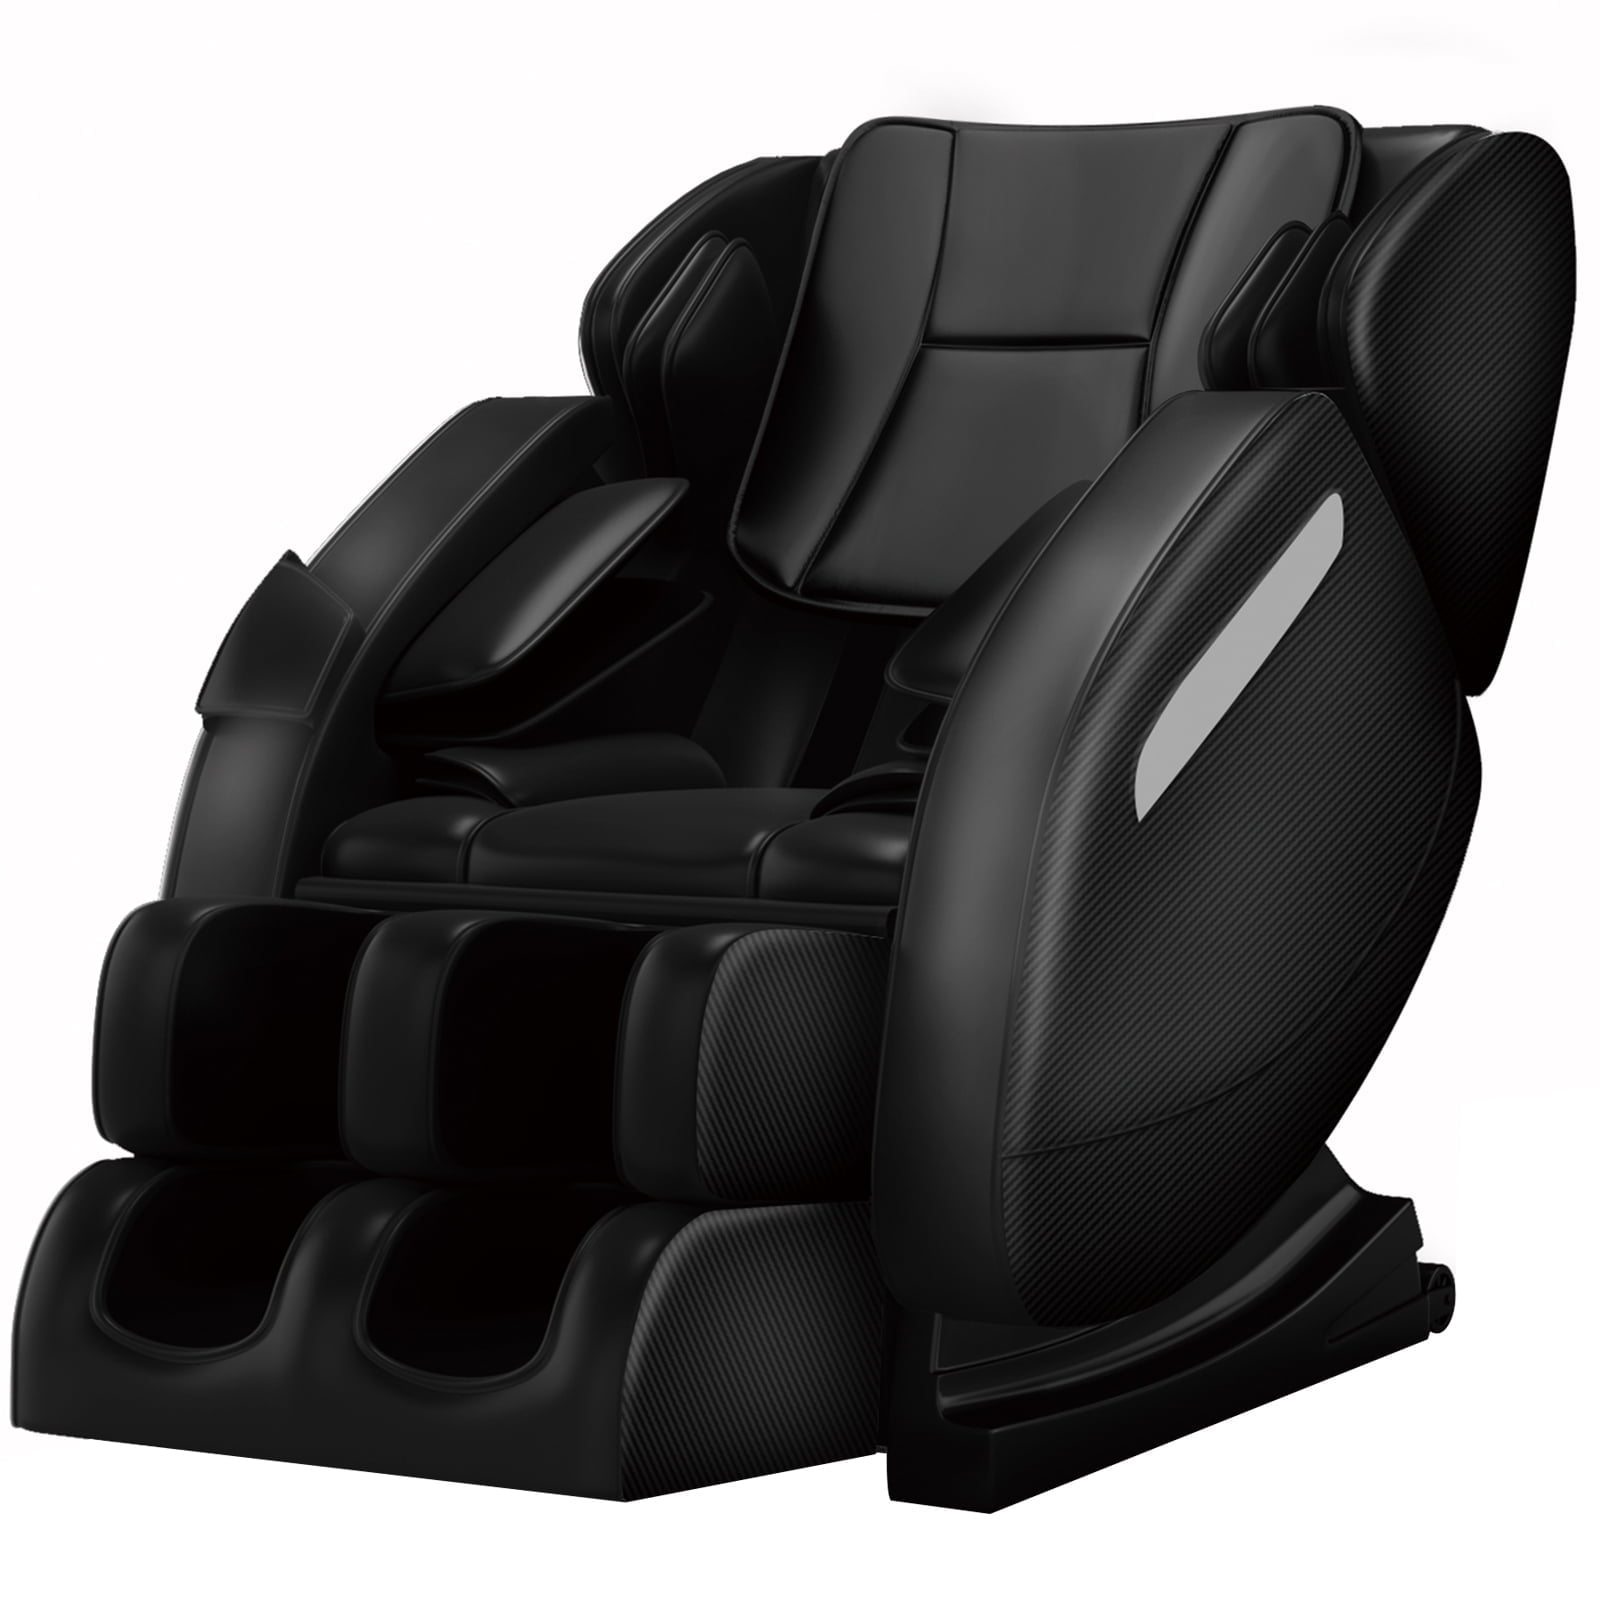 Real Relax Massage Chair, Full Body Recliner with Zero Gravity Chair